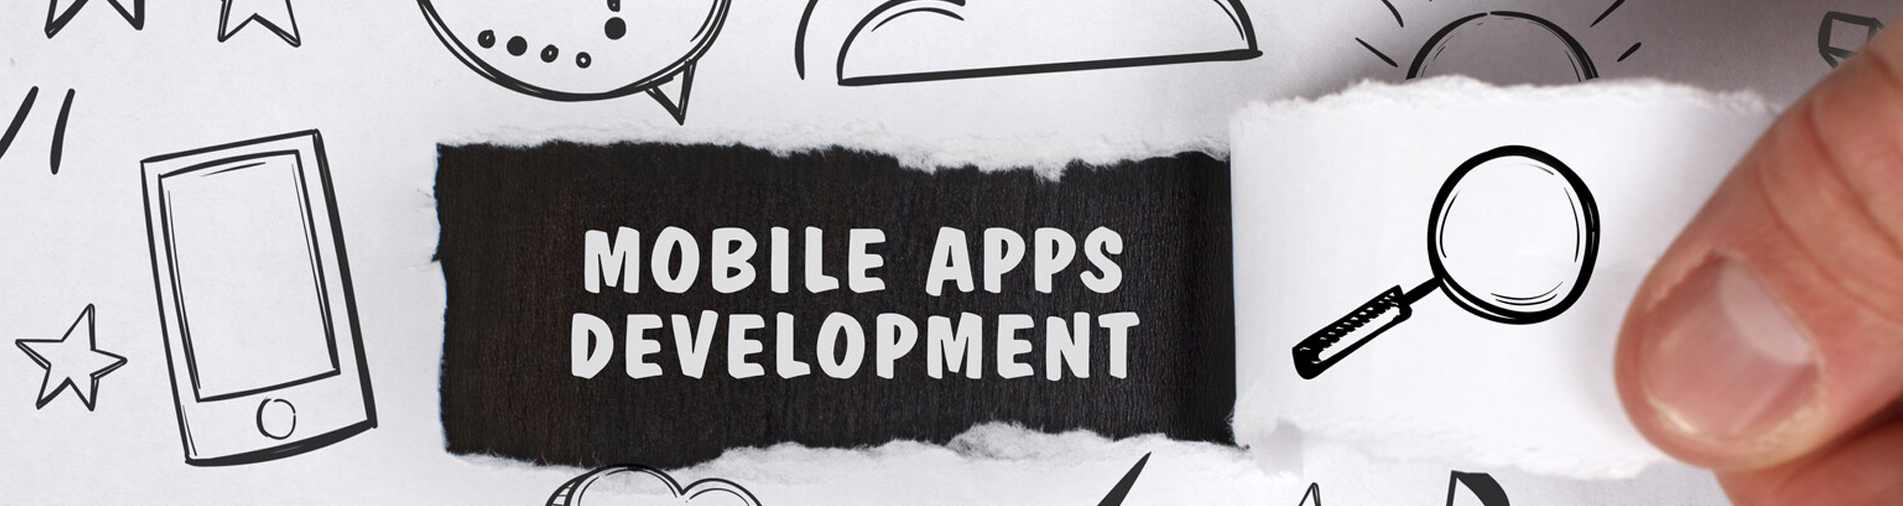 Six Emerging Trends of Mobile App Development Post Covid-19 and App Forecast 2020-2024